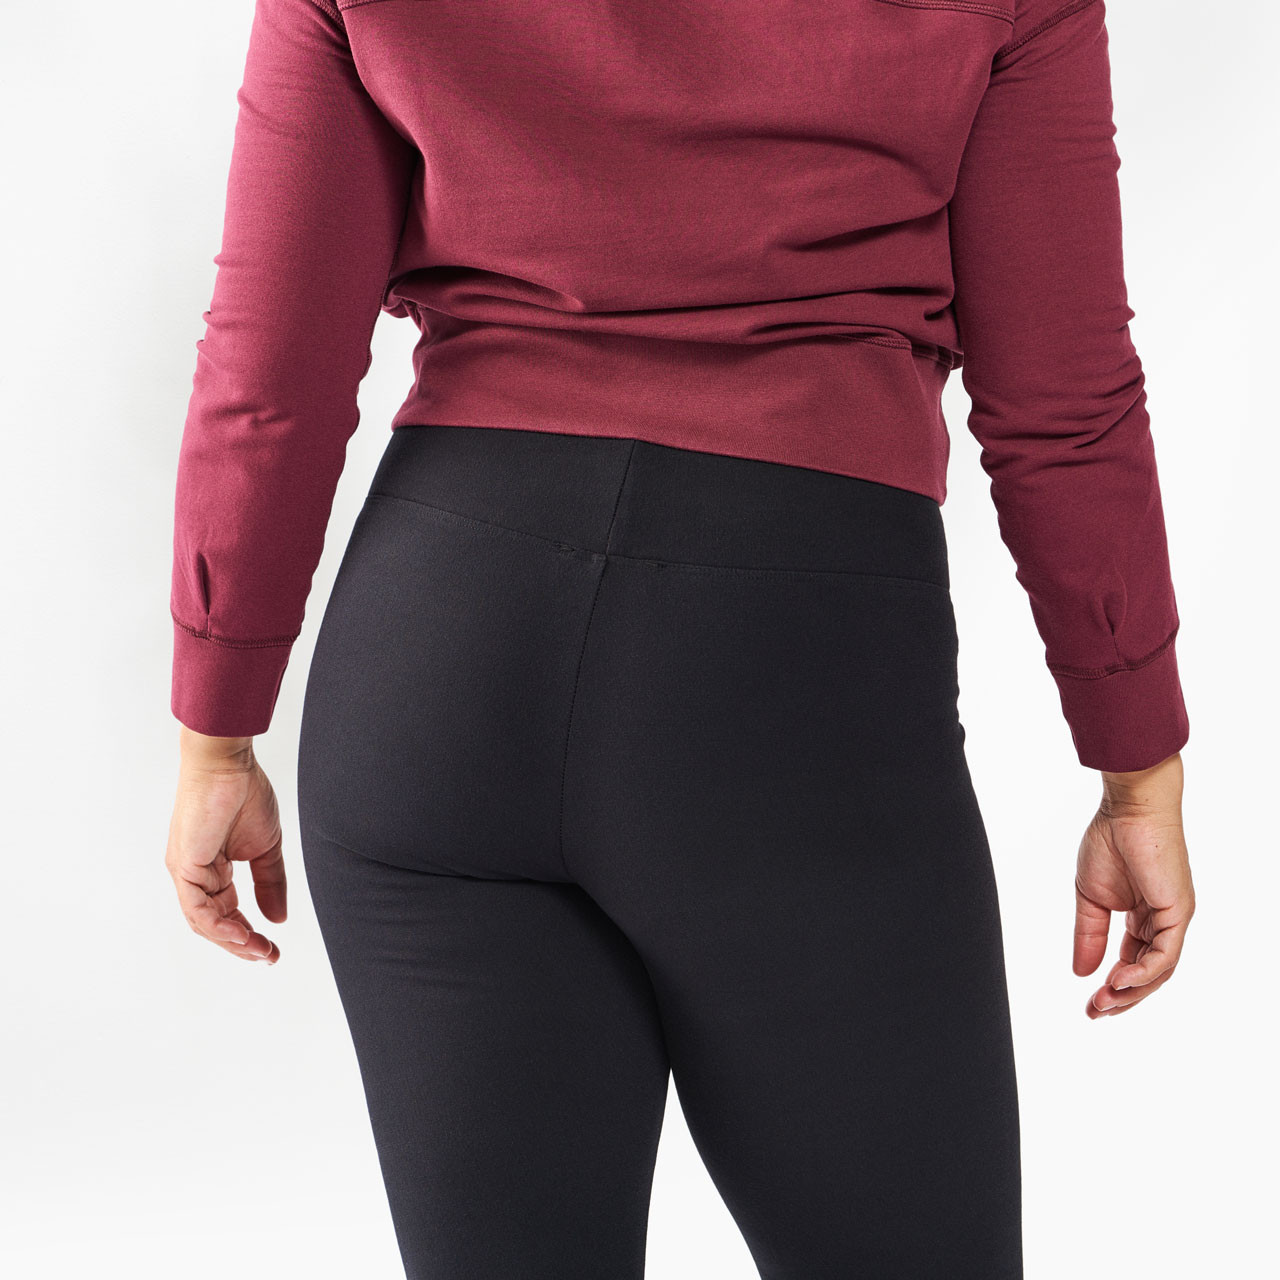 Autumn and winter cotton tight flesh-colored leggings for women to wear  outside the autumn cold